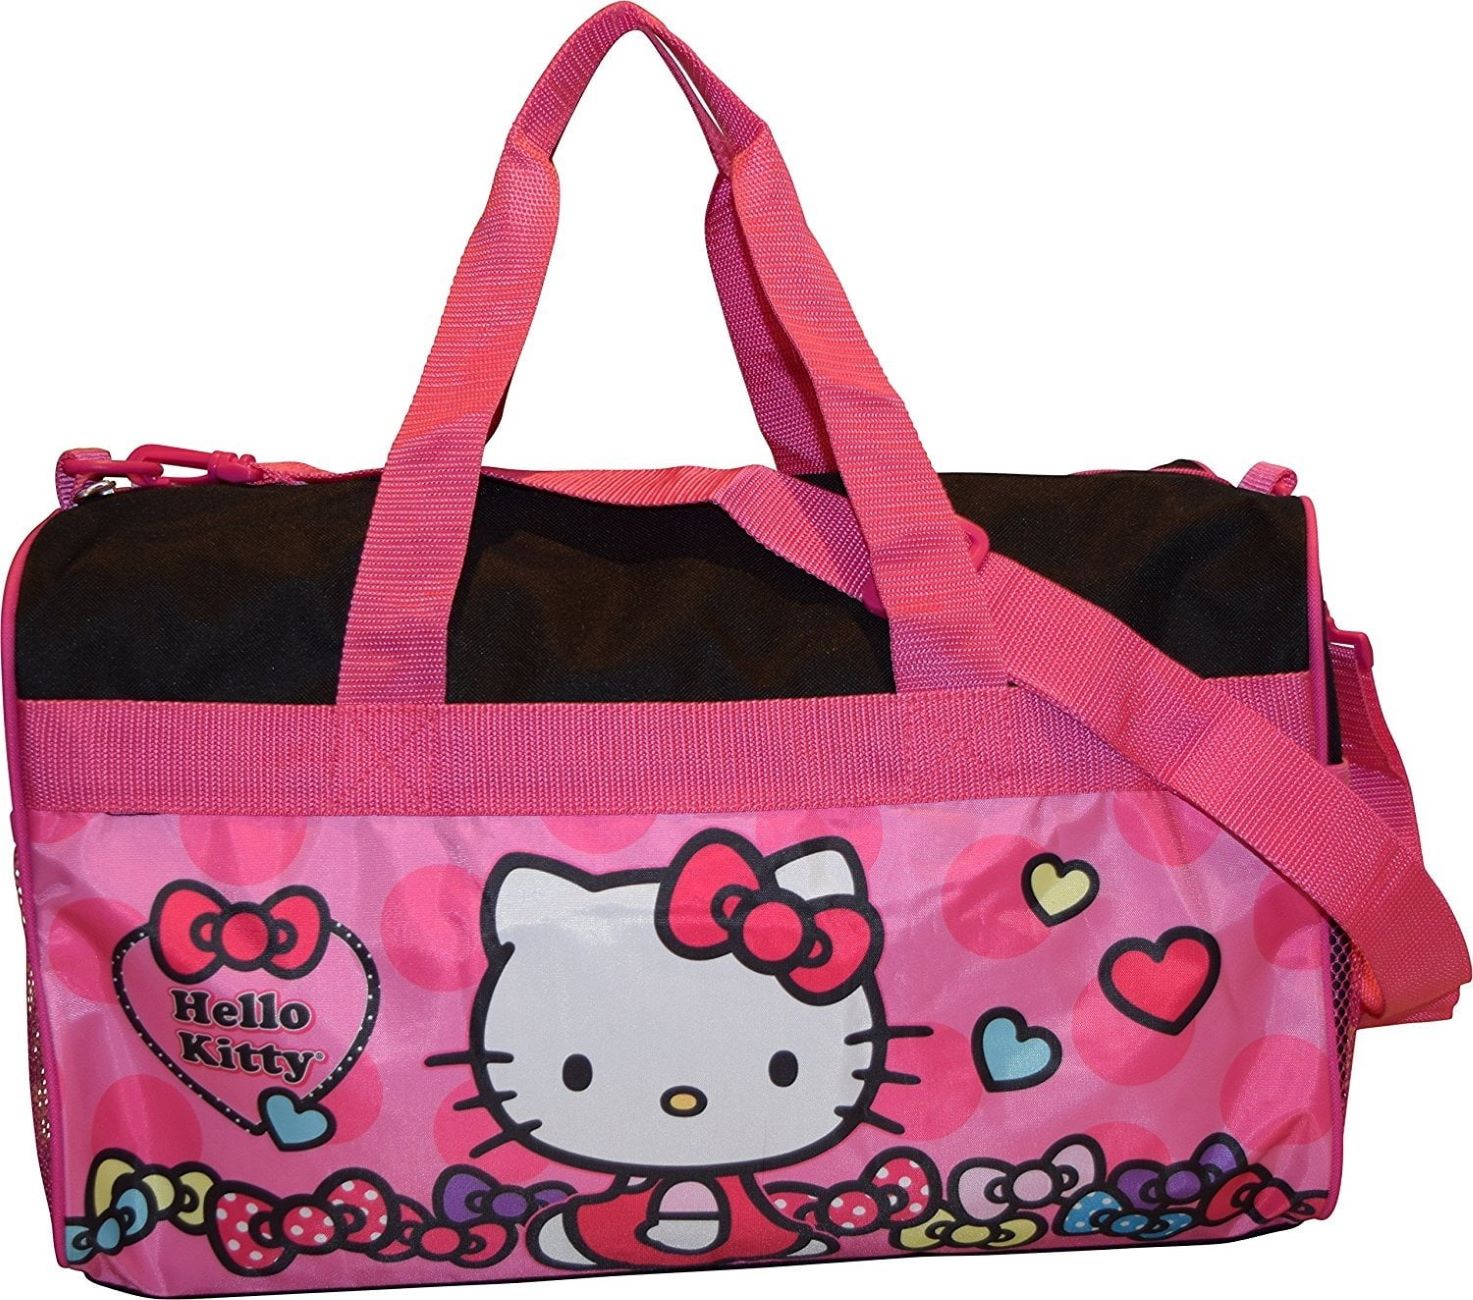 Designer Tote Bag With Zip Beach Gym Travel Bags - Cats Everywhere